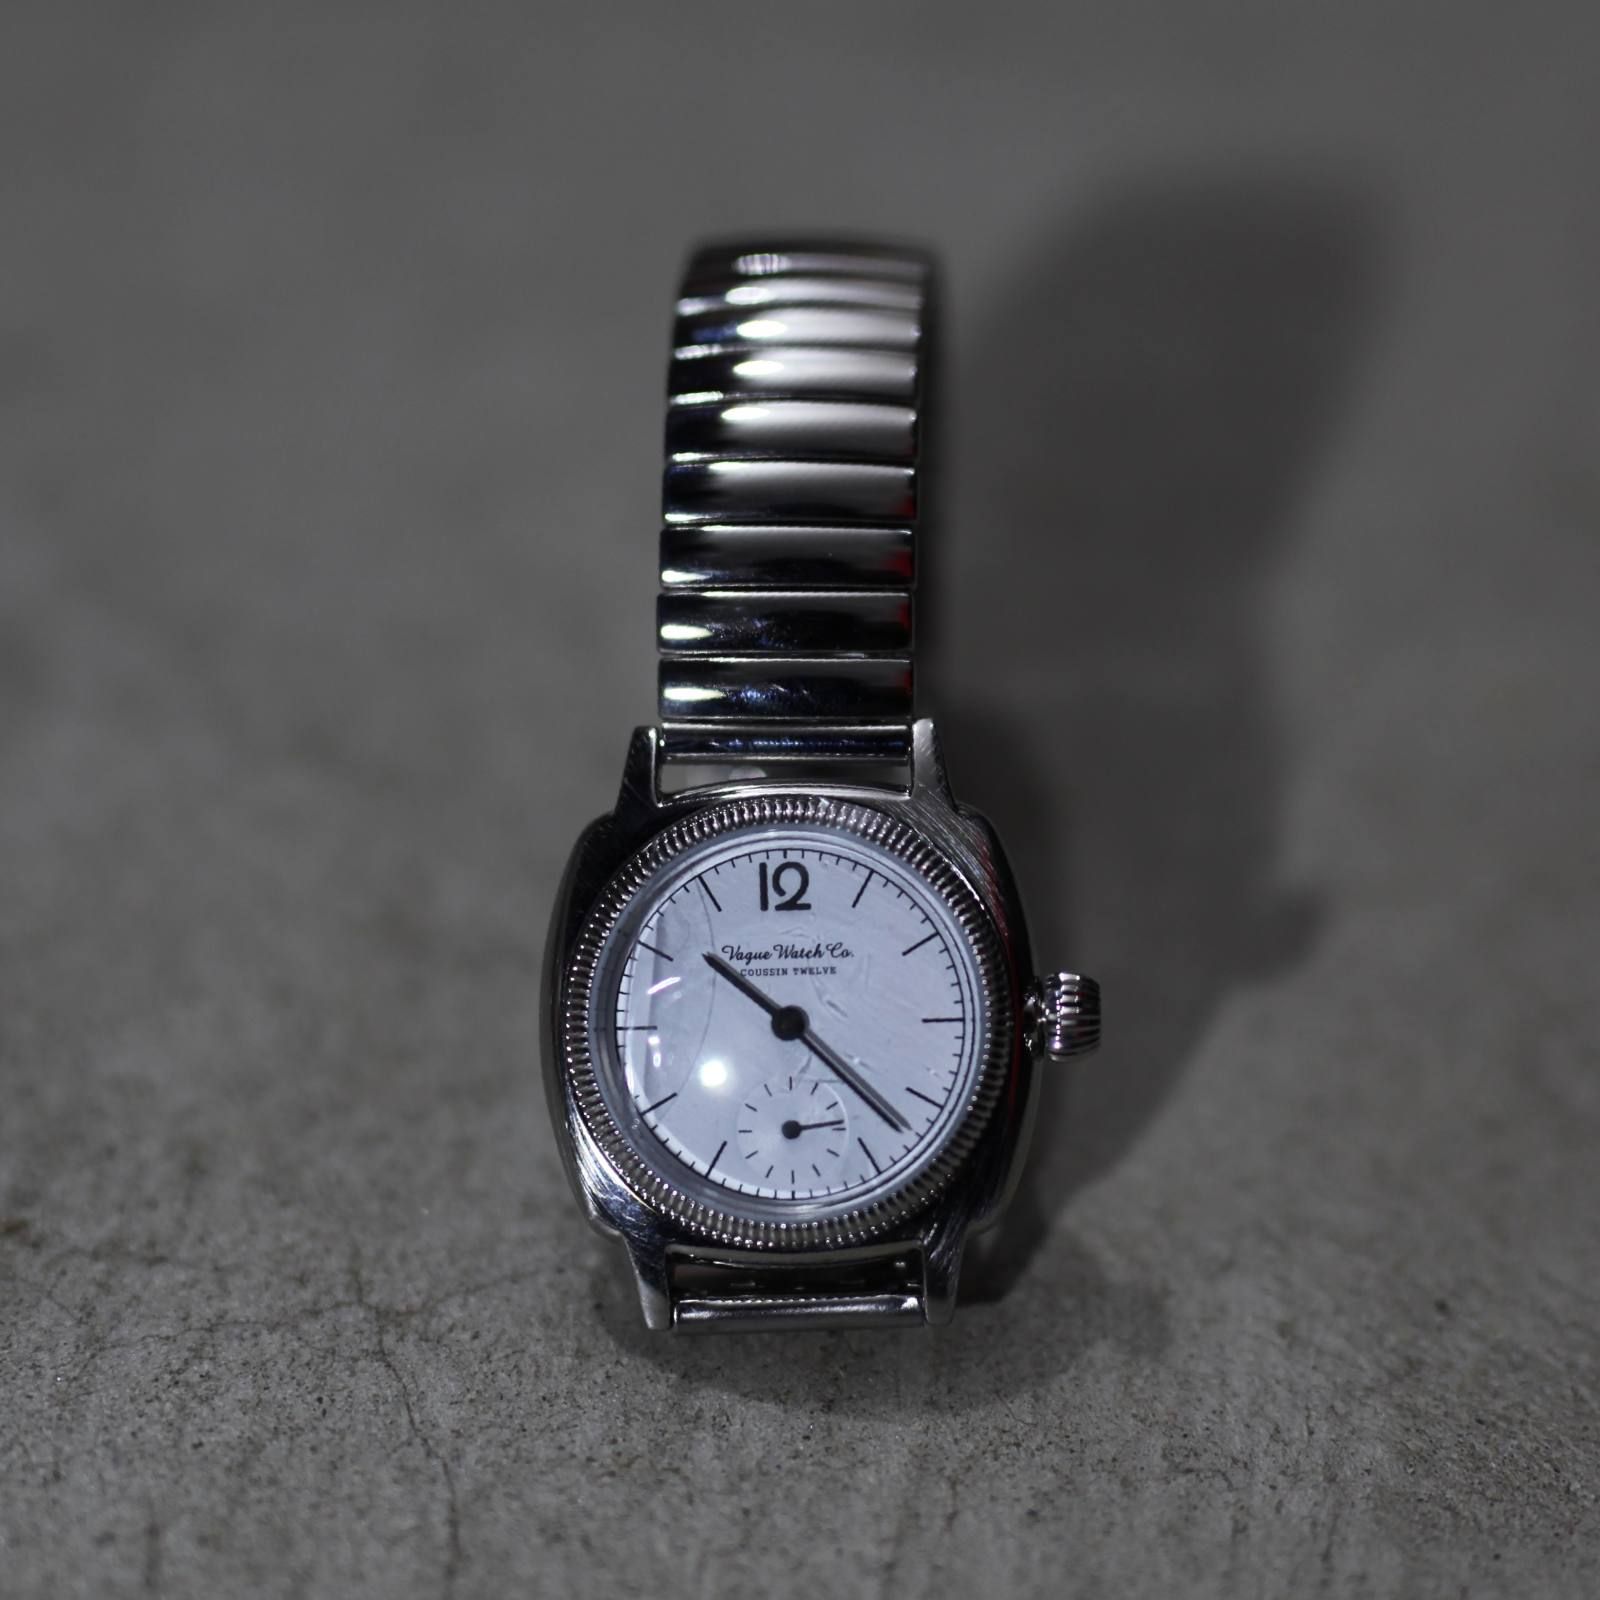 VAGUE WATCH CO. - 【お取り寄せ注文可能】 COUSSIN 12 Extension(MEN